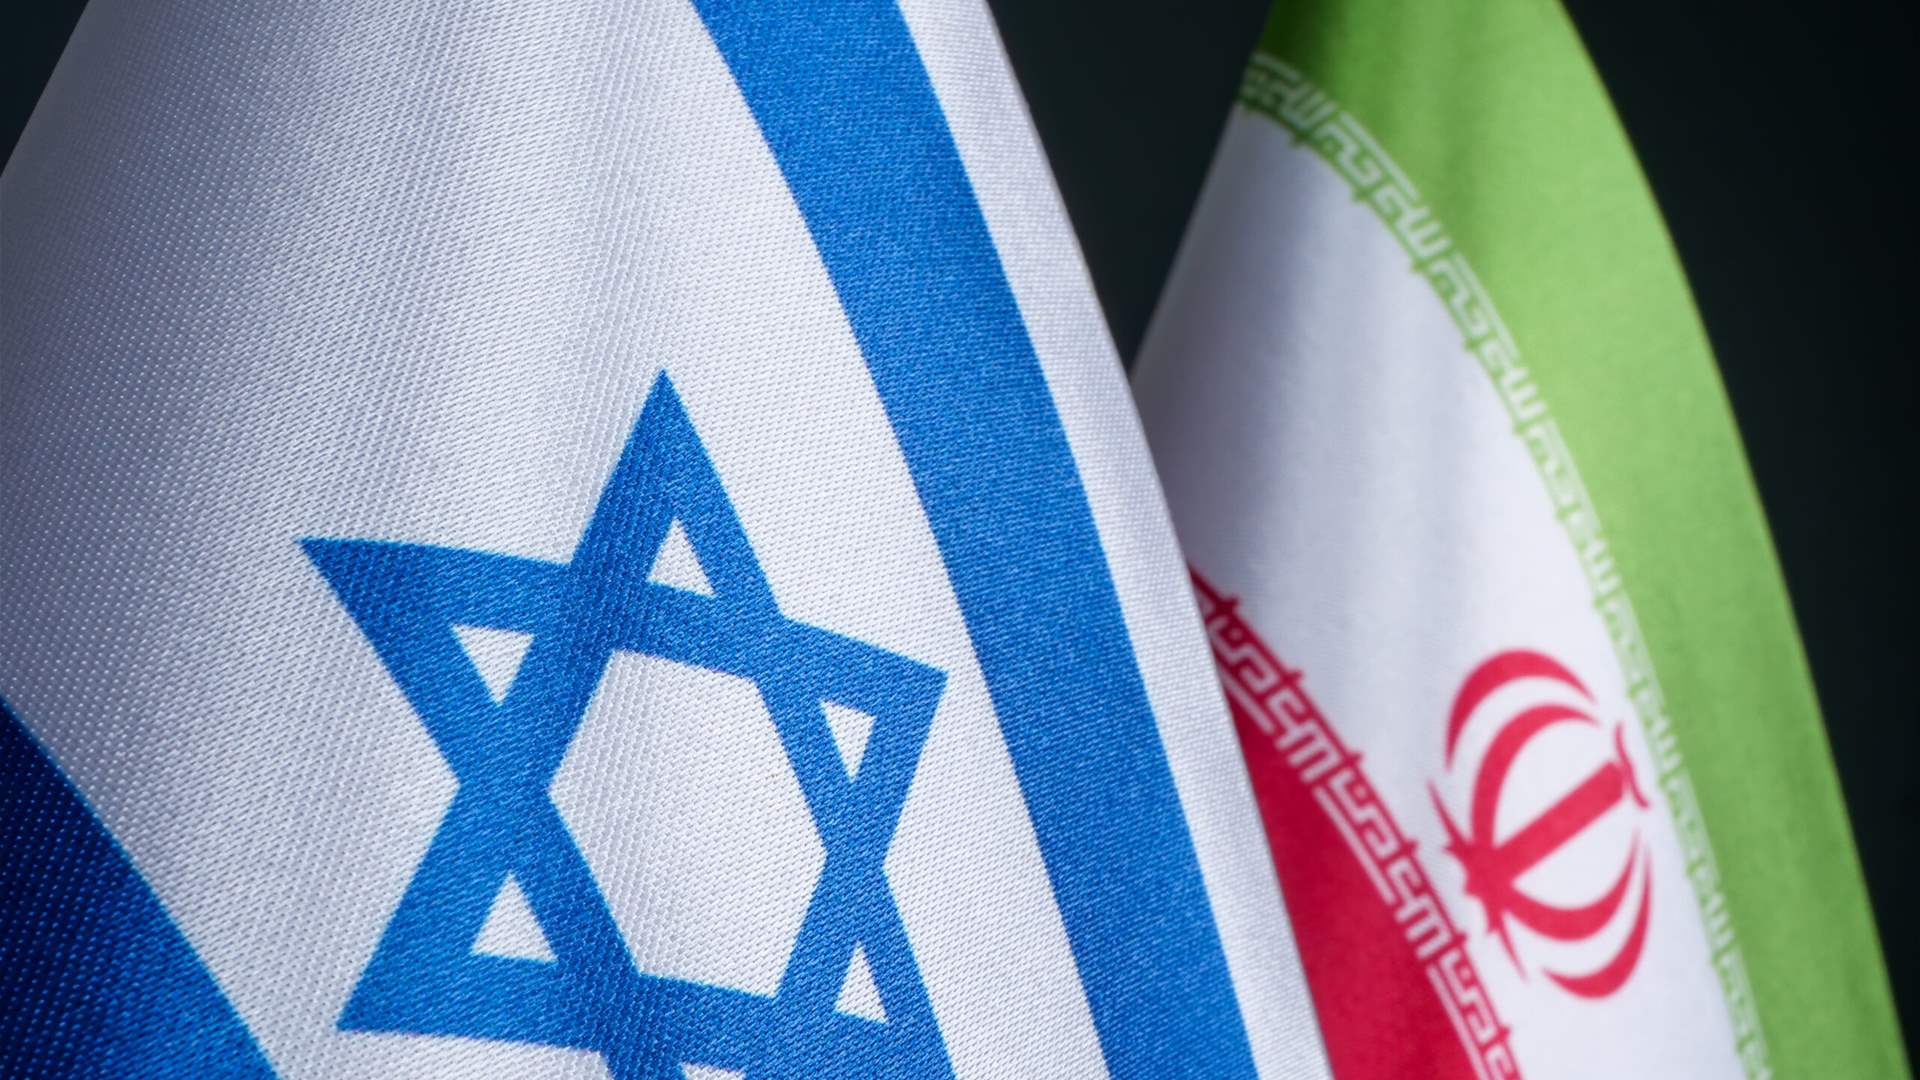 Israel assures regional countries: Response to Iran will not endanger them